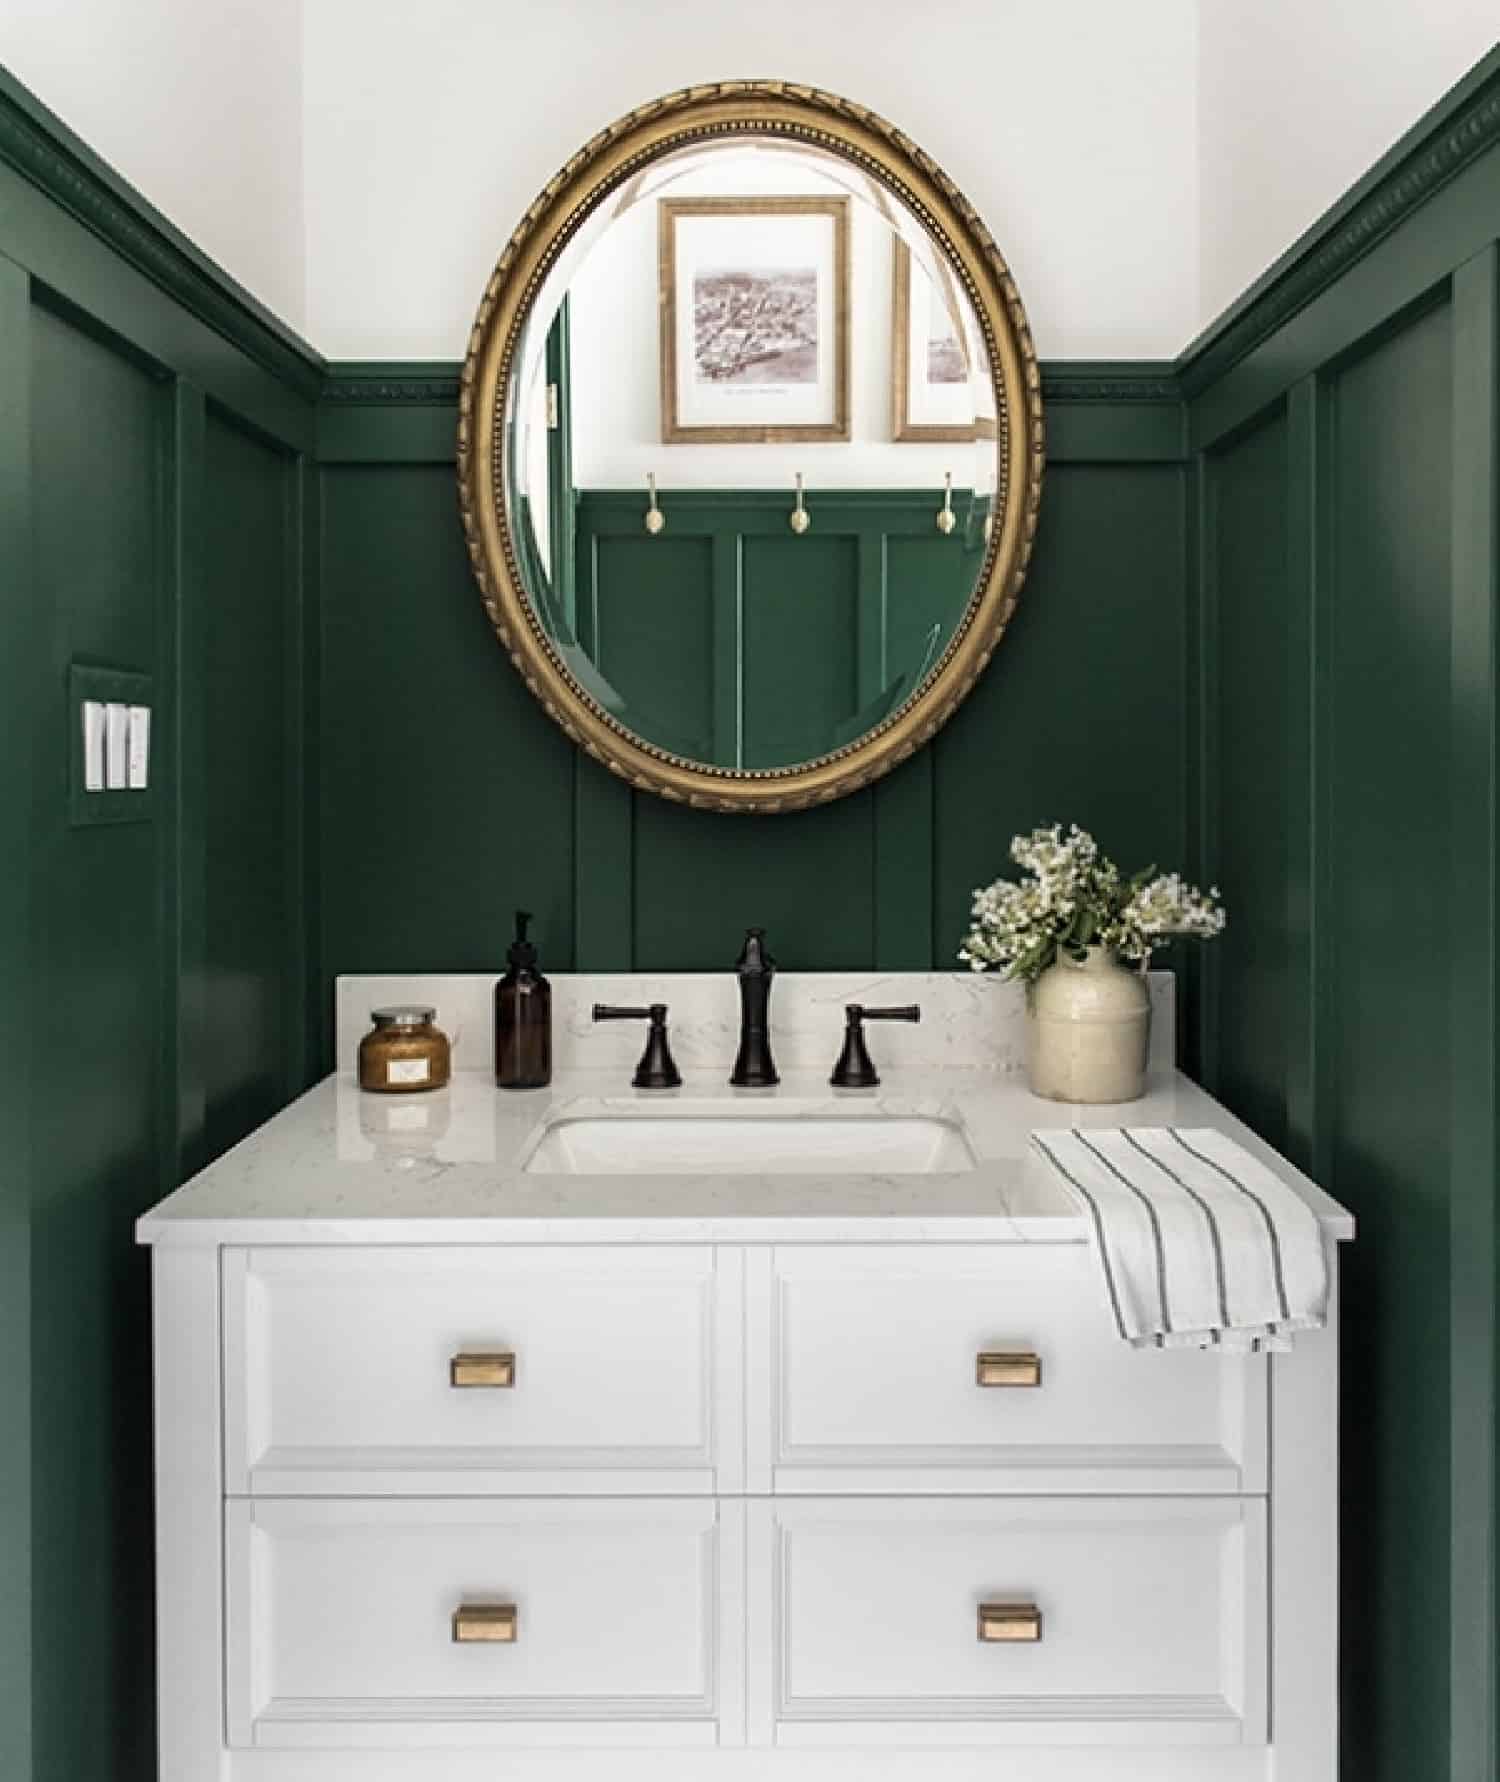 Sophisticated modern farmhouse bathroom with green wainscoting walls, a polished white sink and gold mirror.